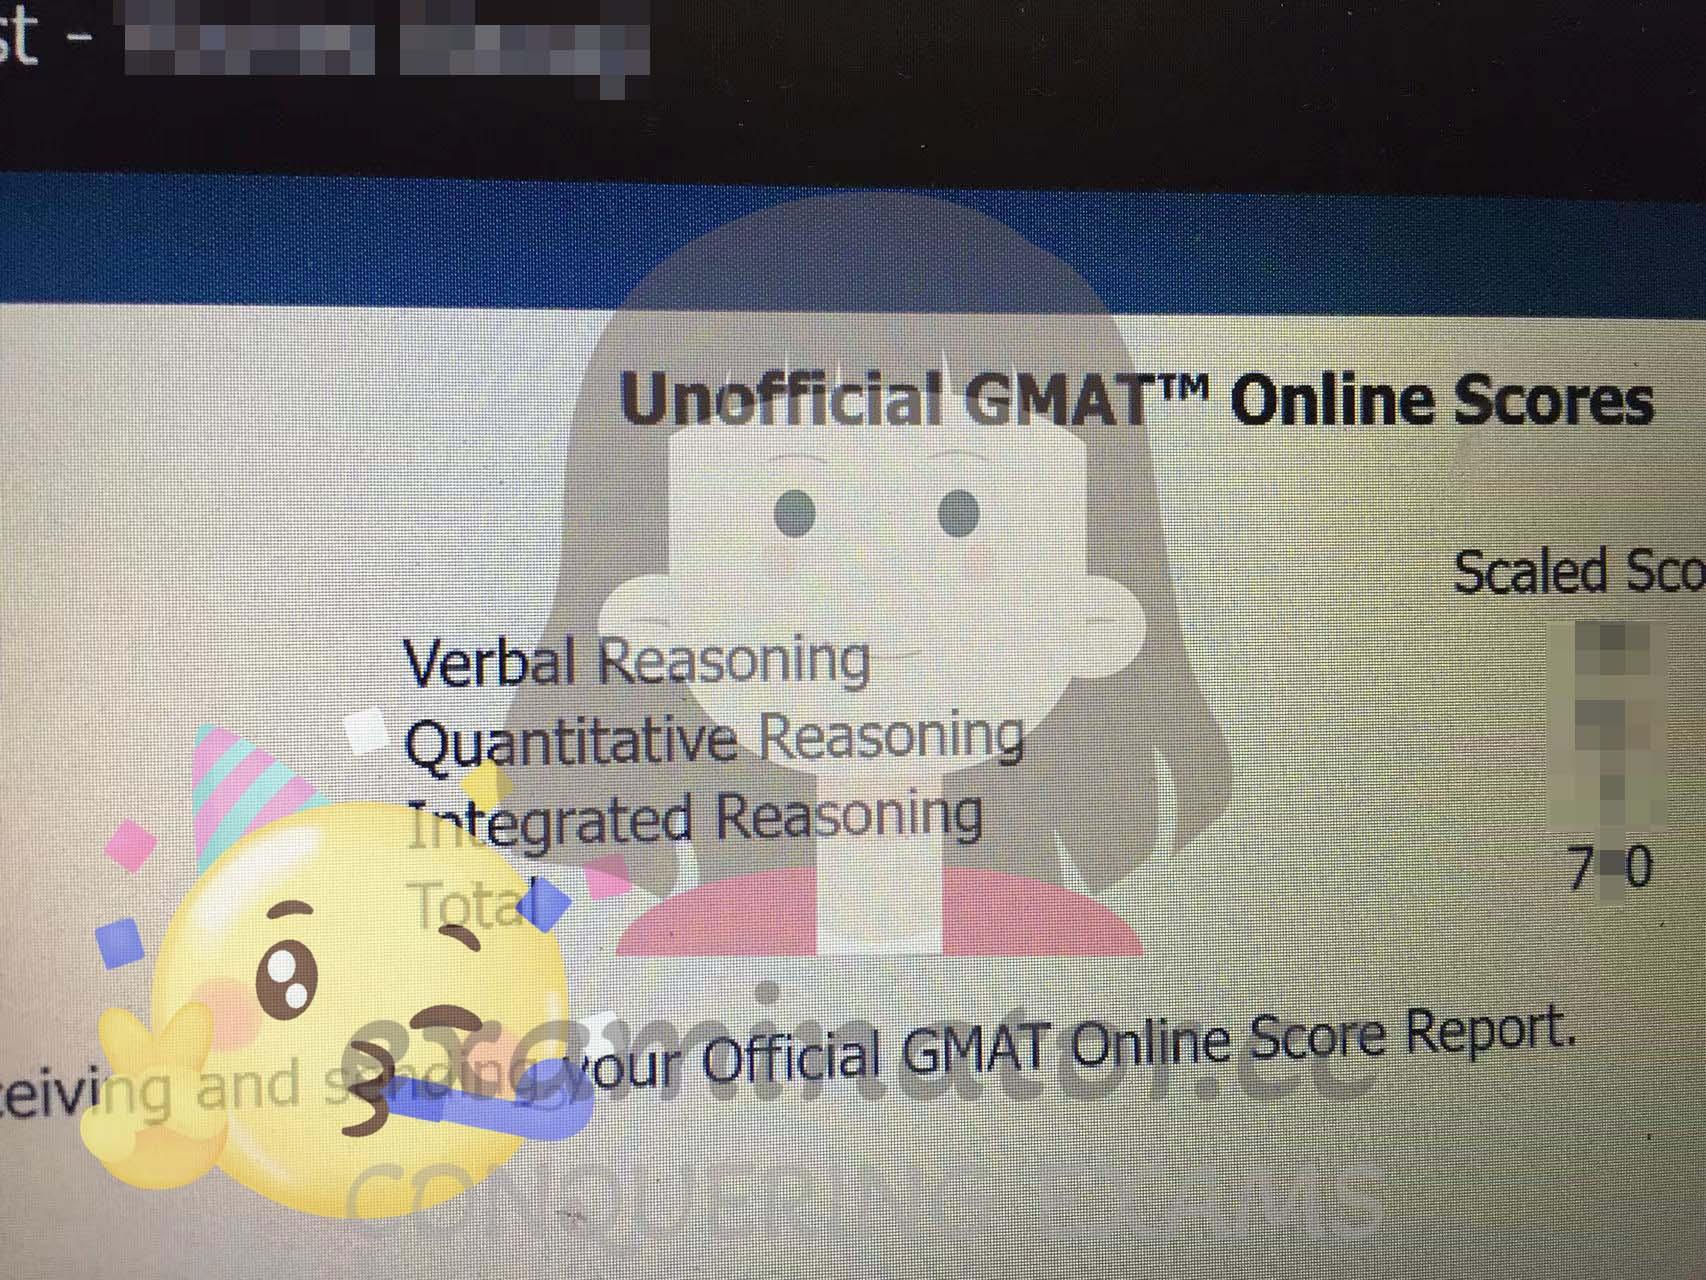 🇰🇼 Acing GMAT: Kuwait Client Scores 770+ with Our GMAT Proxy Testing Expert Help and Wraps Up Payment in Under 30 Minutes! ⚡️